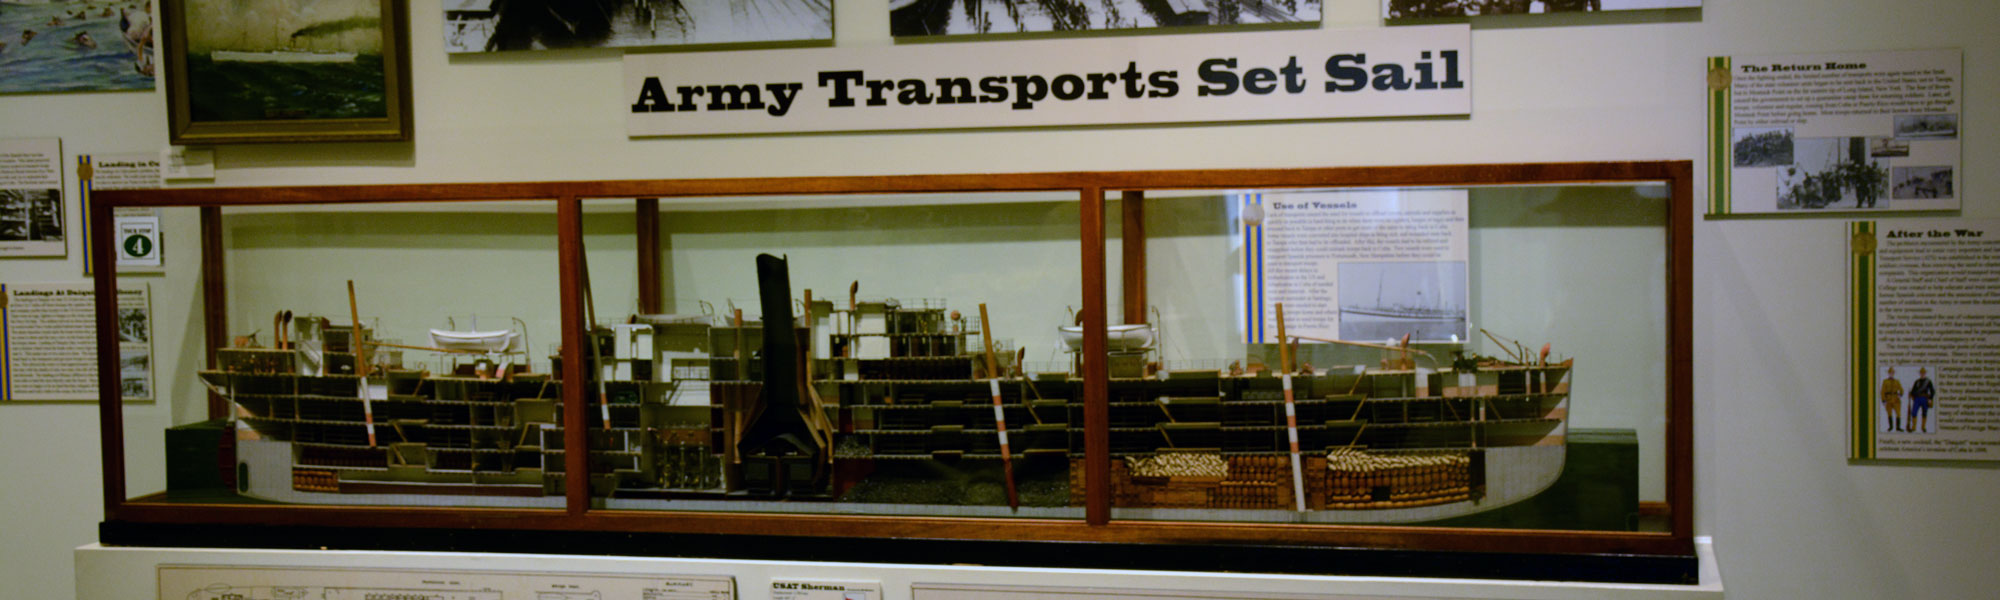 Image of transport ship modal used to explain how men and equipment were moved during this period.